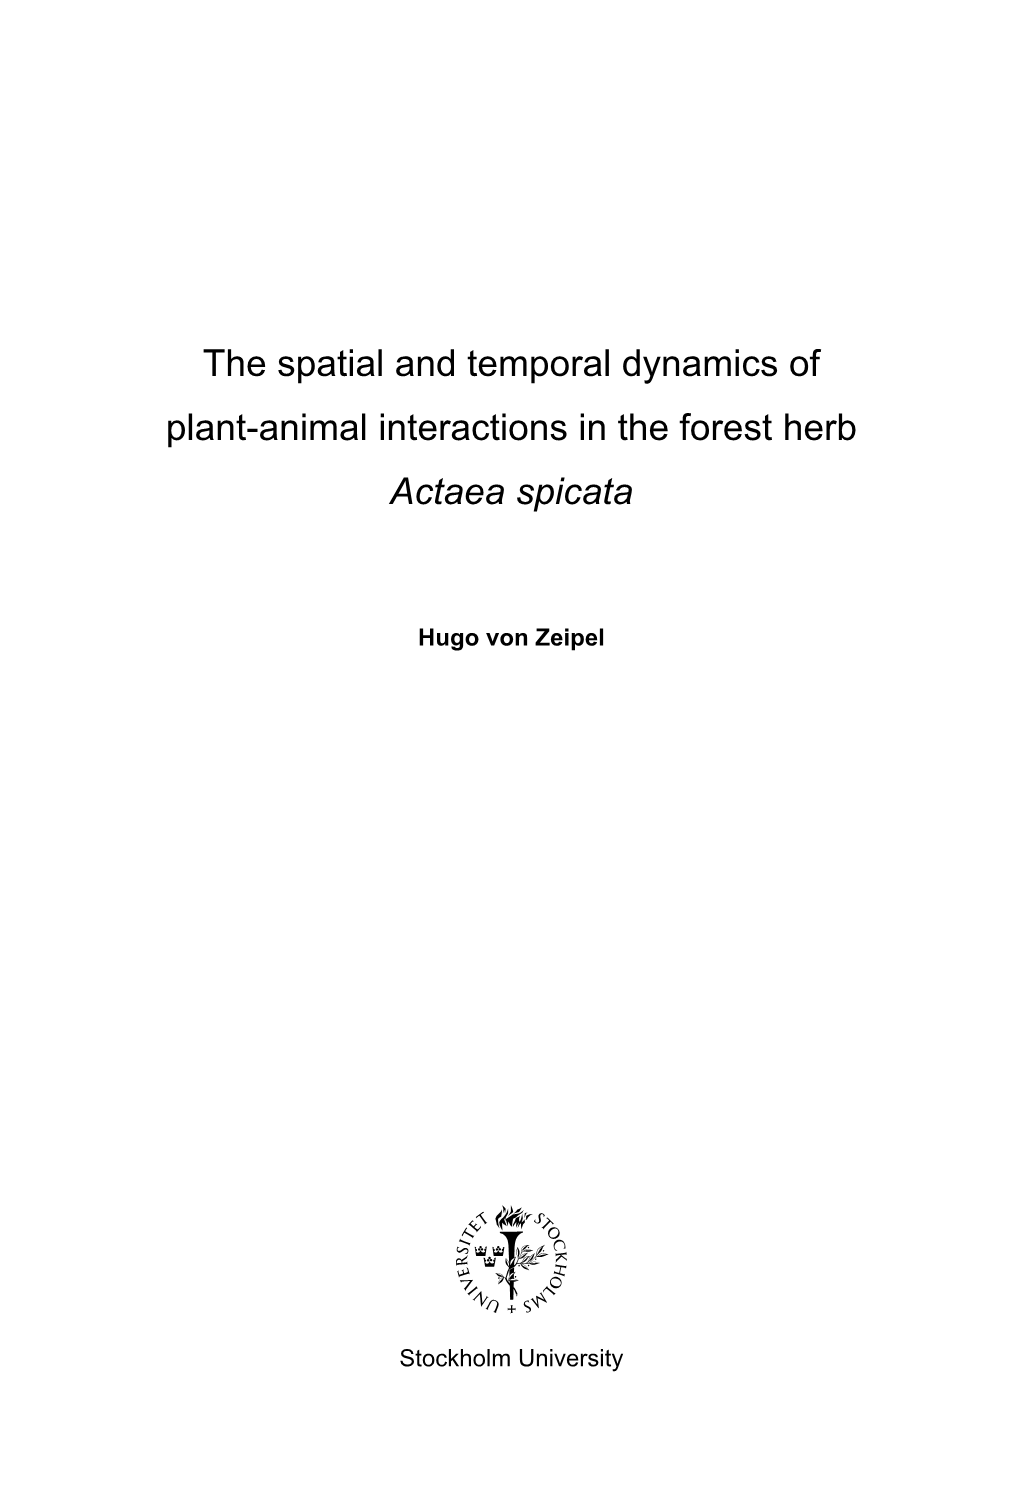 The Spatial and Temporal Dynamics of Plant-Animal Interactions in the Forest Herb Actaea Spicata